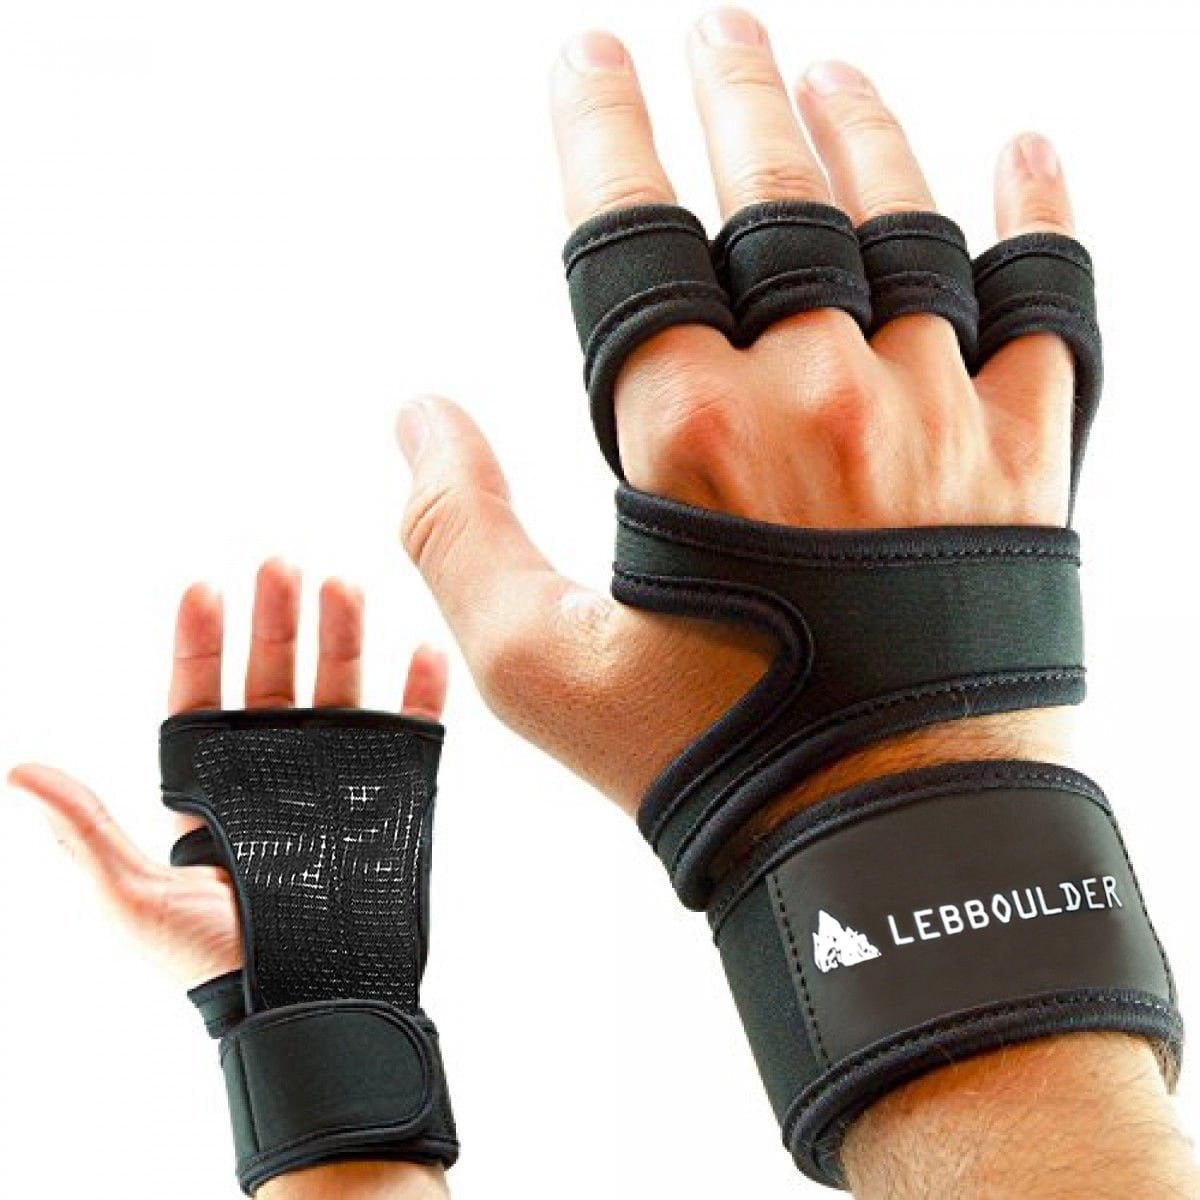 Workout Gloves Weight Lifting WOD Gym Crossfit Training Wraps Exercise Fitness 